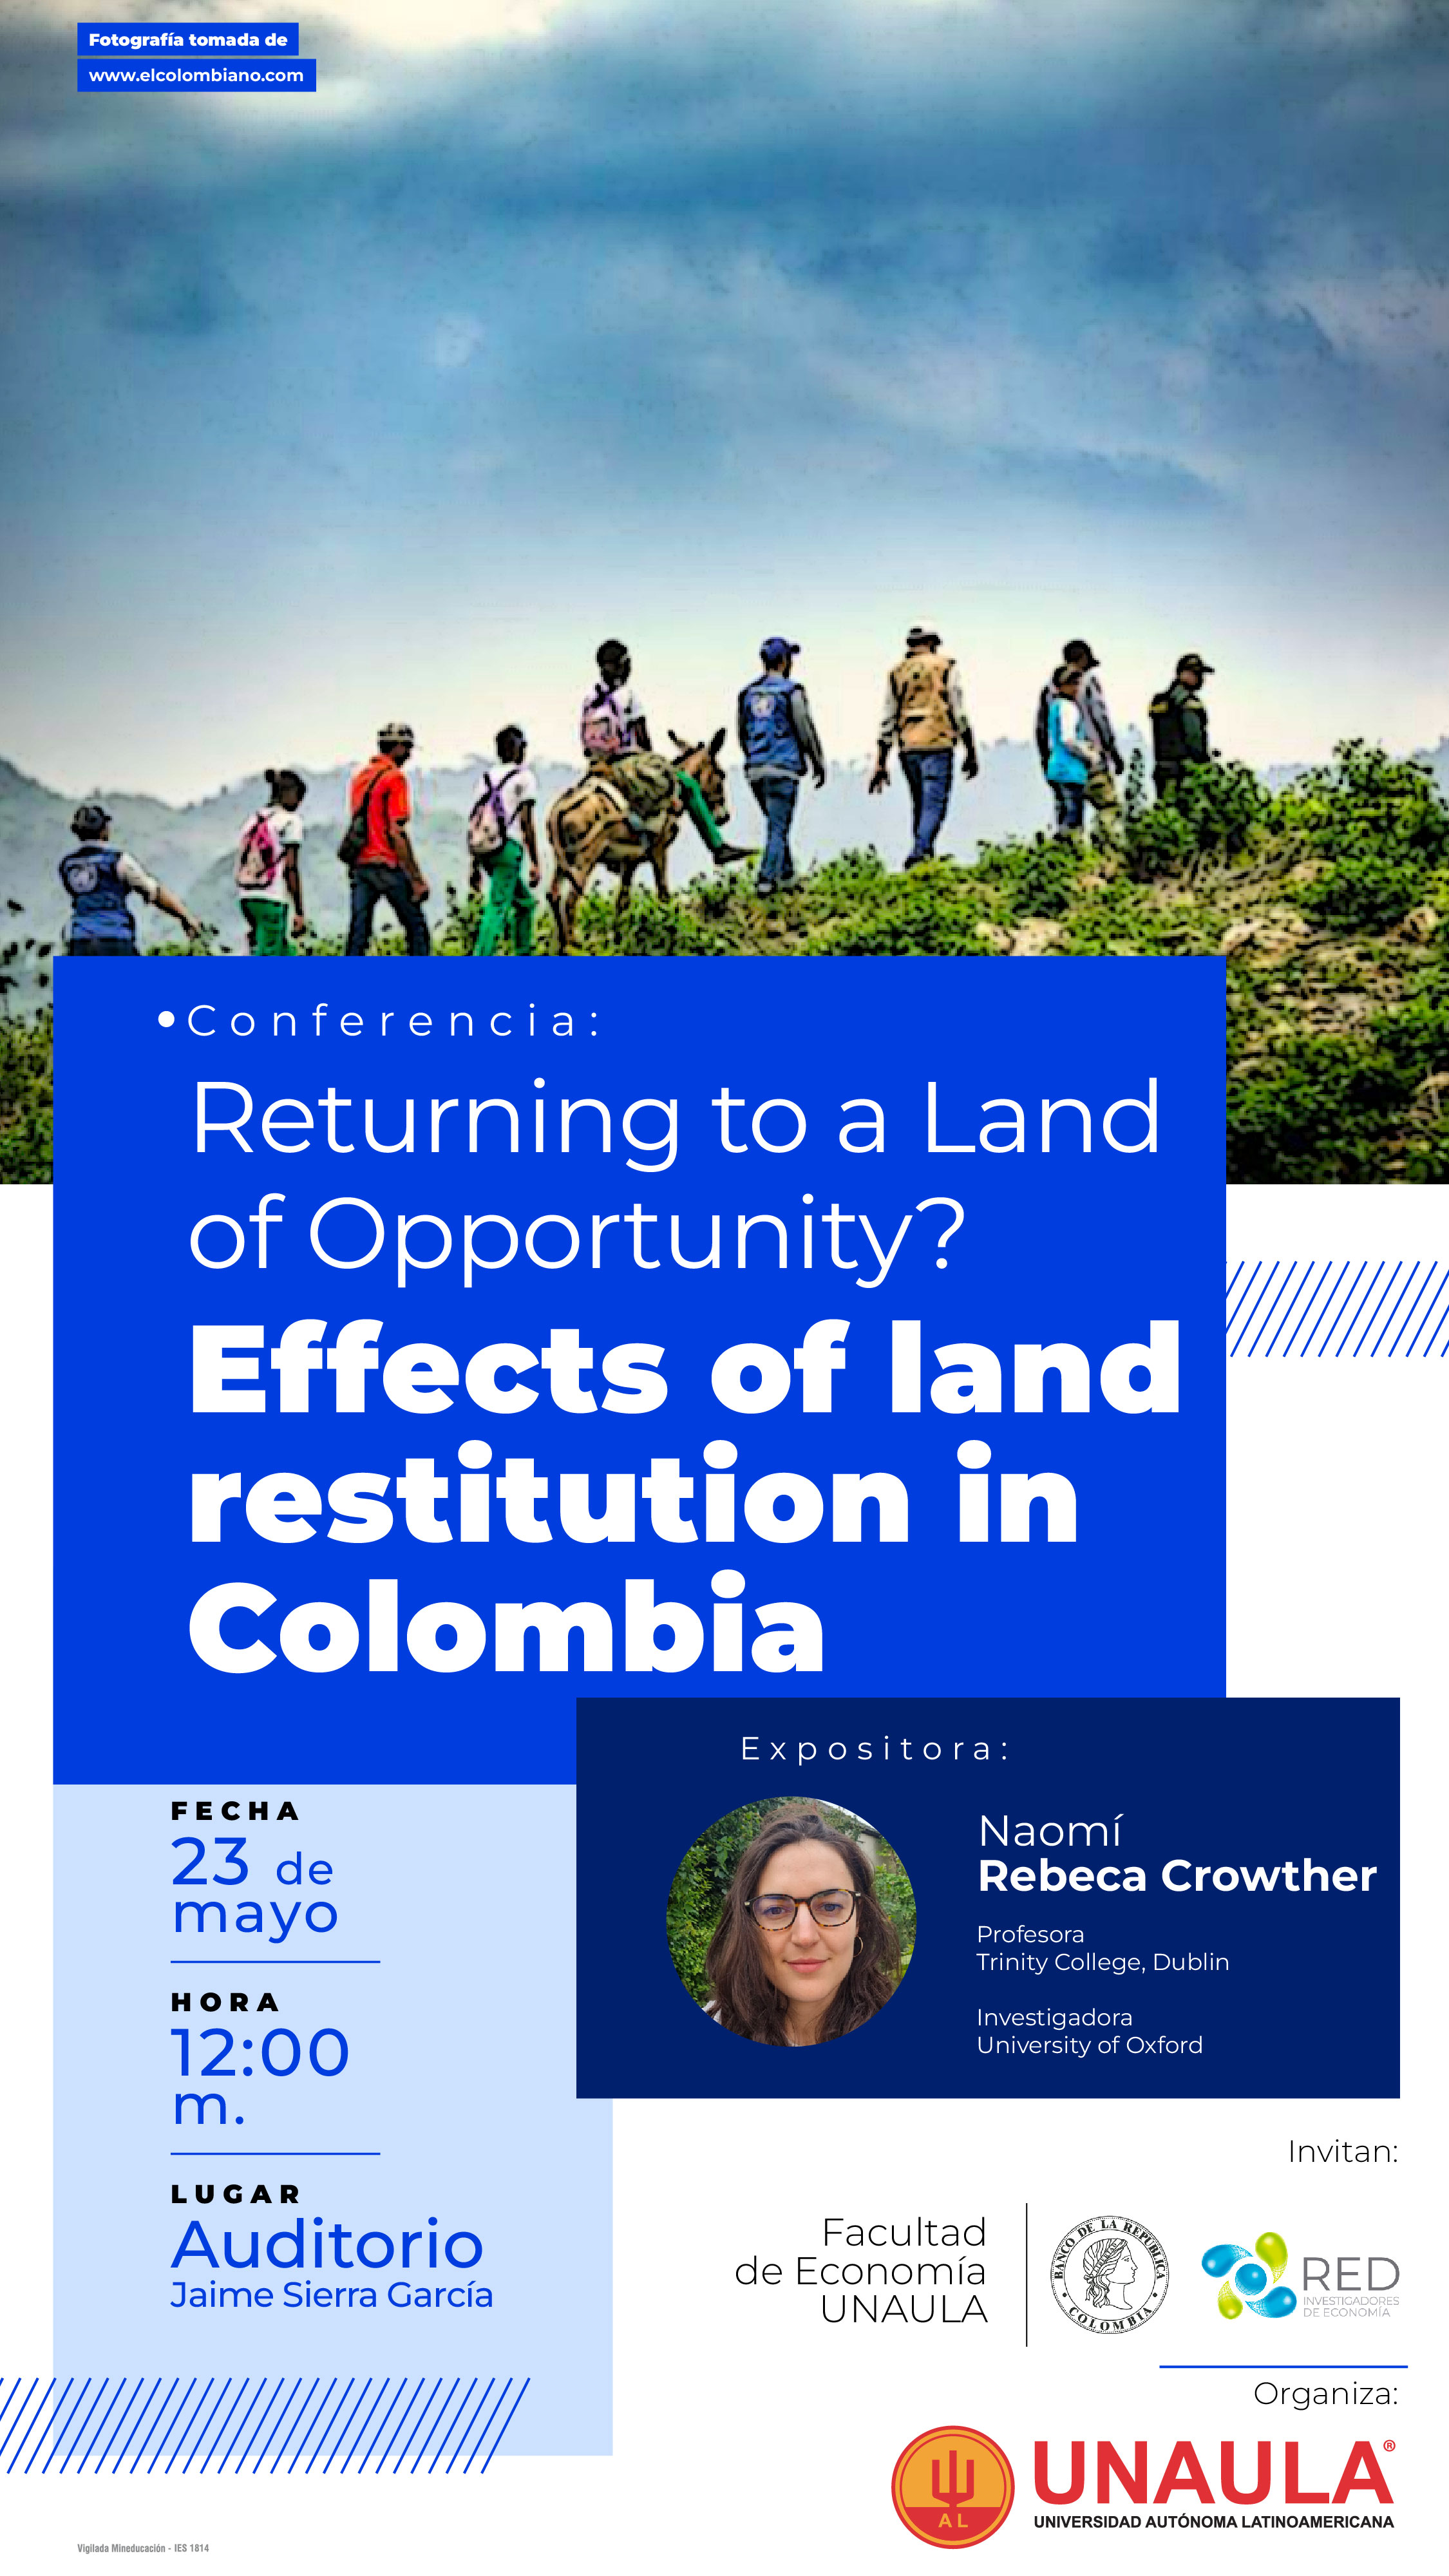 Conferencia: Effects of land restitution in Colombia